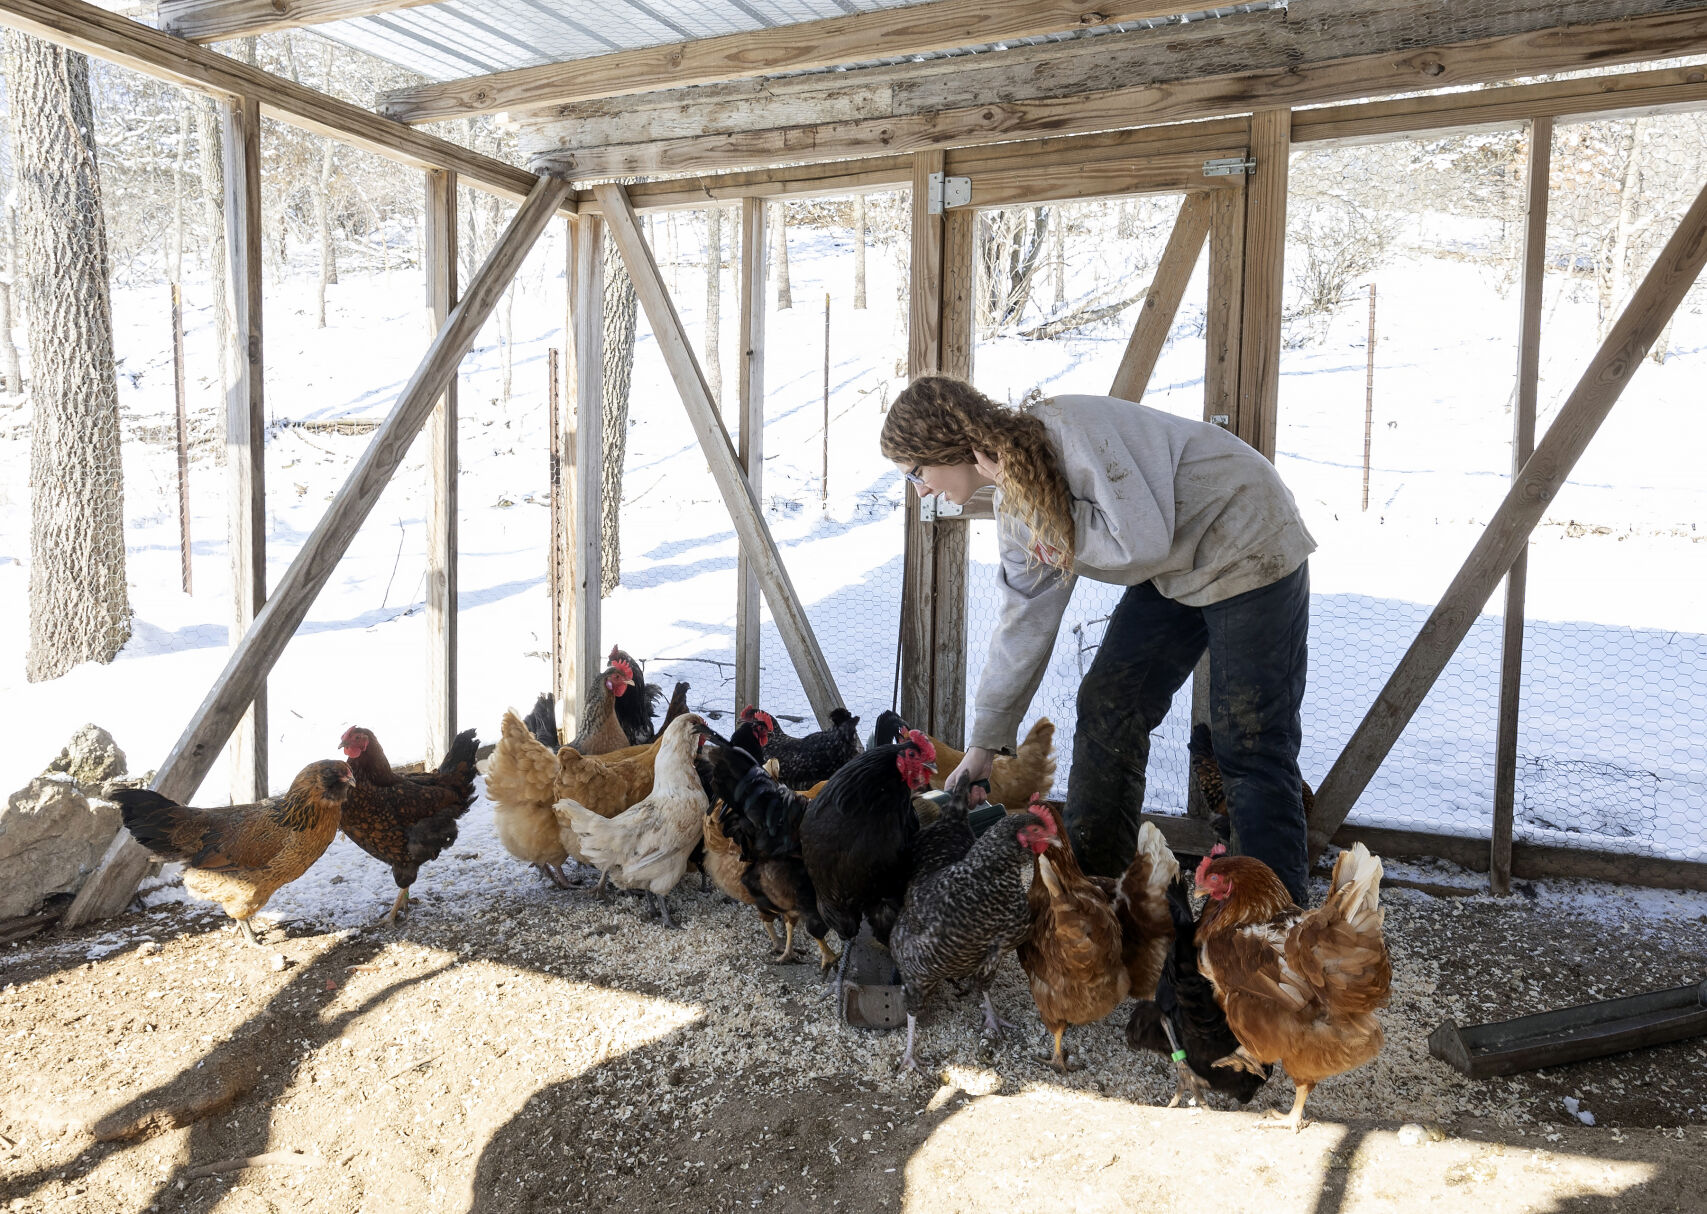 Caroline Kilian, 15, feeds the chickens at Oak Hollow Farm in rural Platteville, Wis. The family offers eggs and beef as a sixth generation of Wisconsin farmers.    PHOTO CREDIT: Stephen Gassman
Telegraph Herald